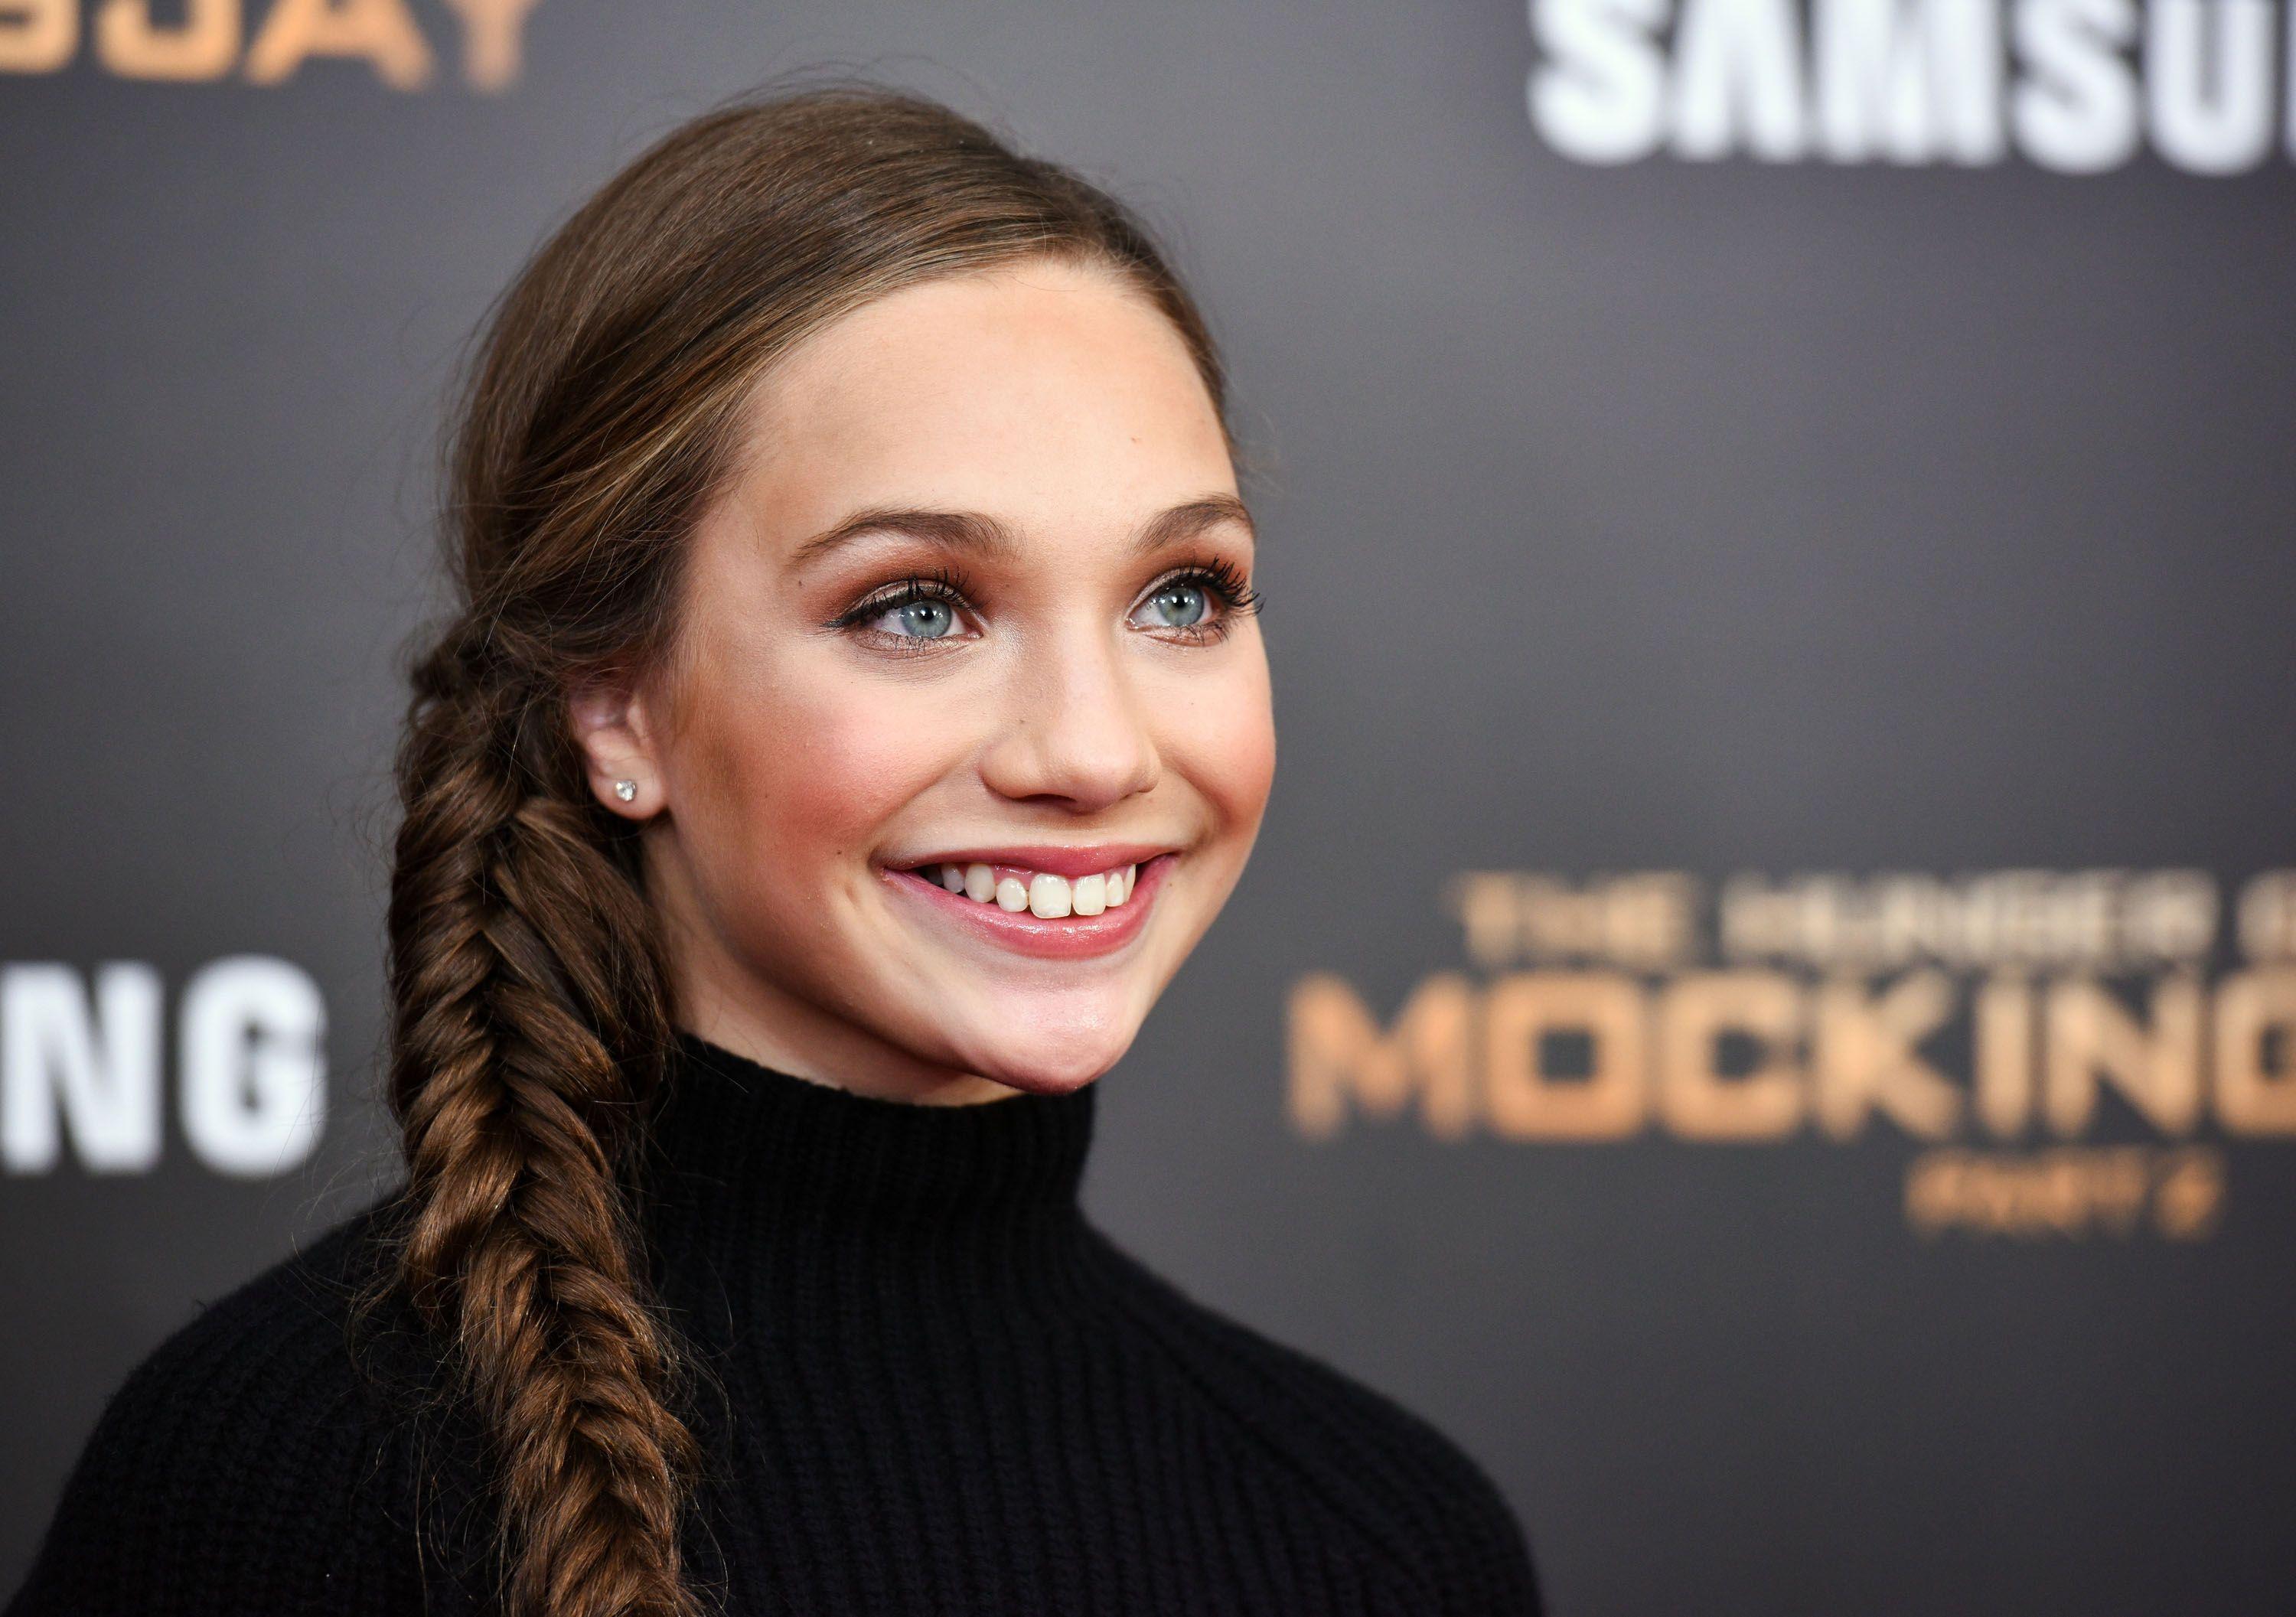 Maddie Ziegler Reveals What Project She's Excited About!